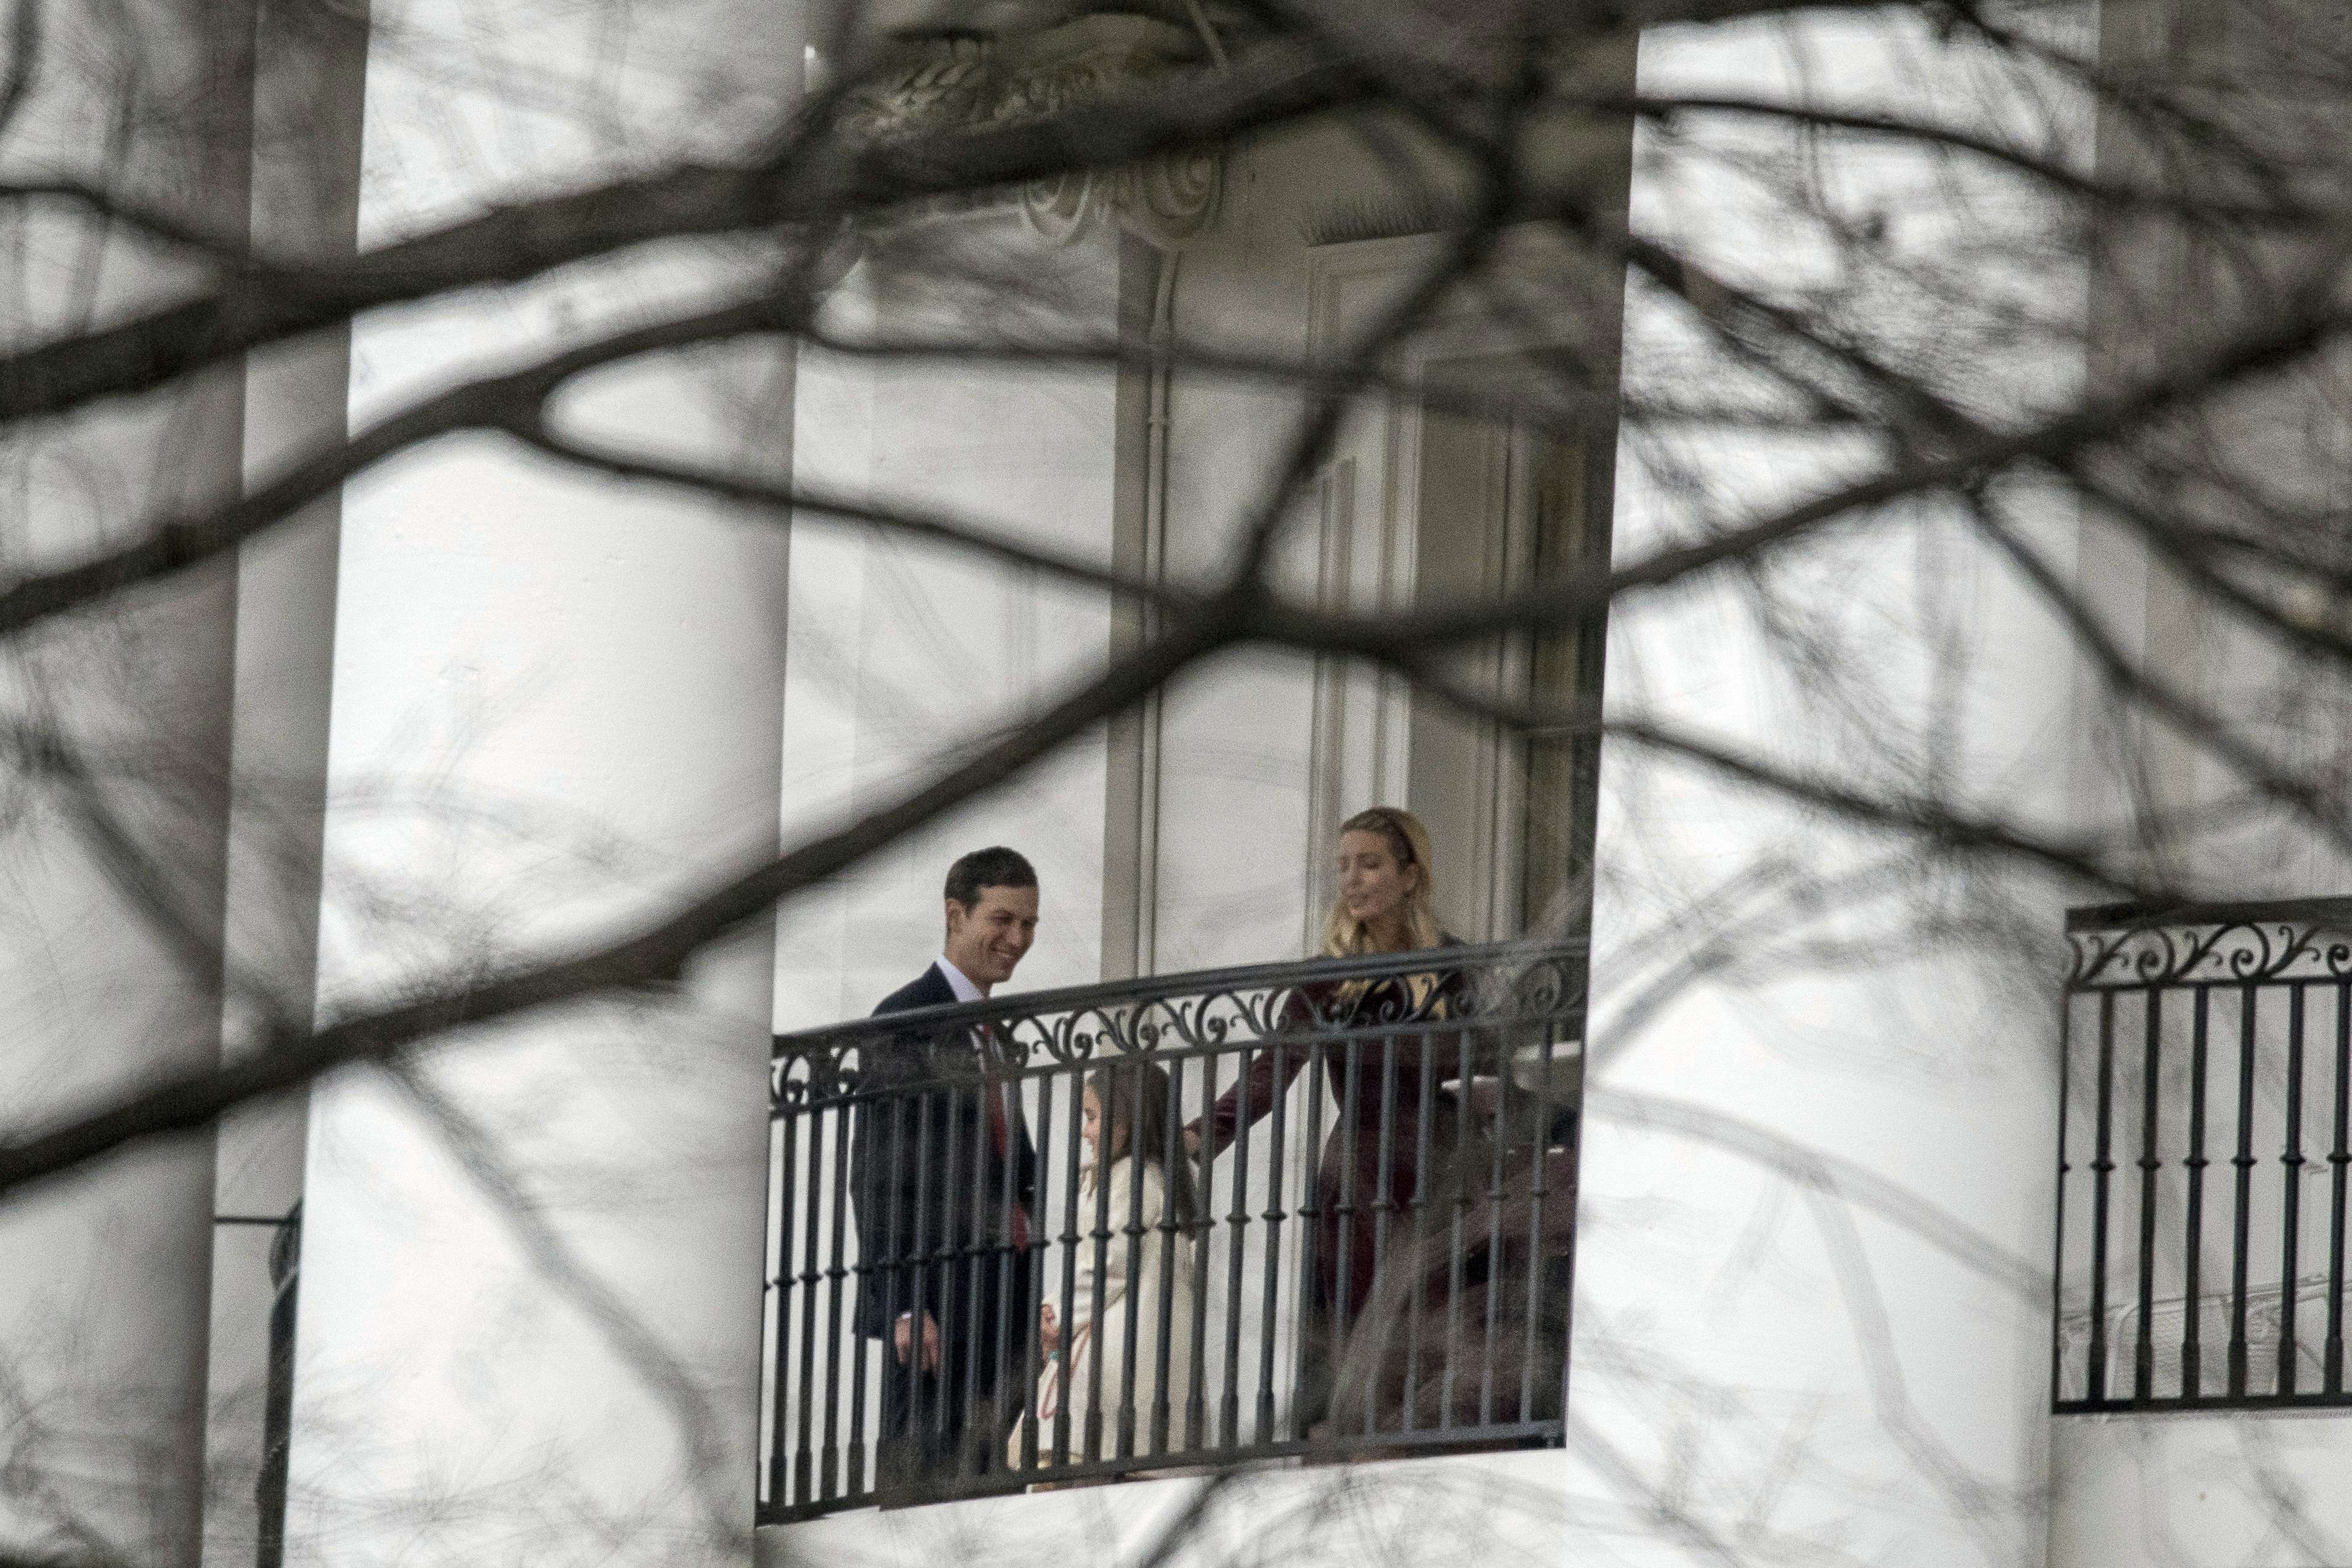 Ivanka Trump, the daughter of US President Donald Trump, right, her husband Jared Kushner, left, and their daughter Arabella Kushner, center, take photographs on the Truman Balcony of the White House on the first full day of Trump's administration. Photo: AP